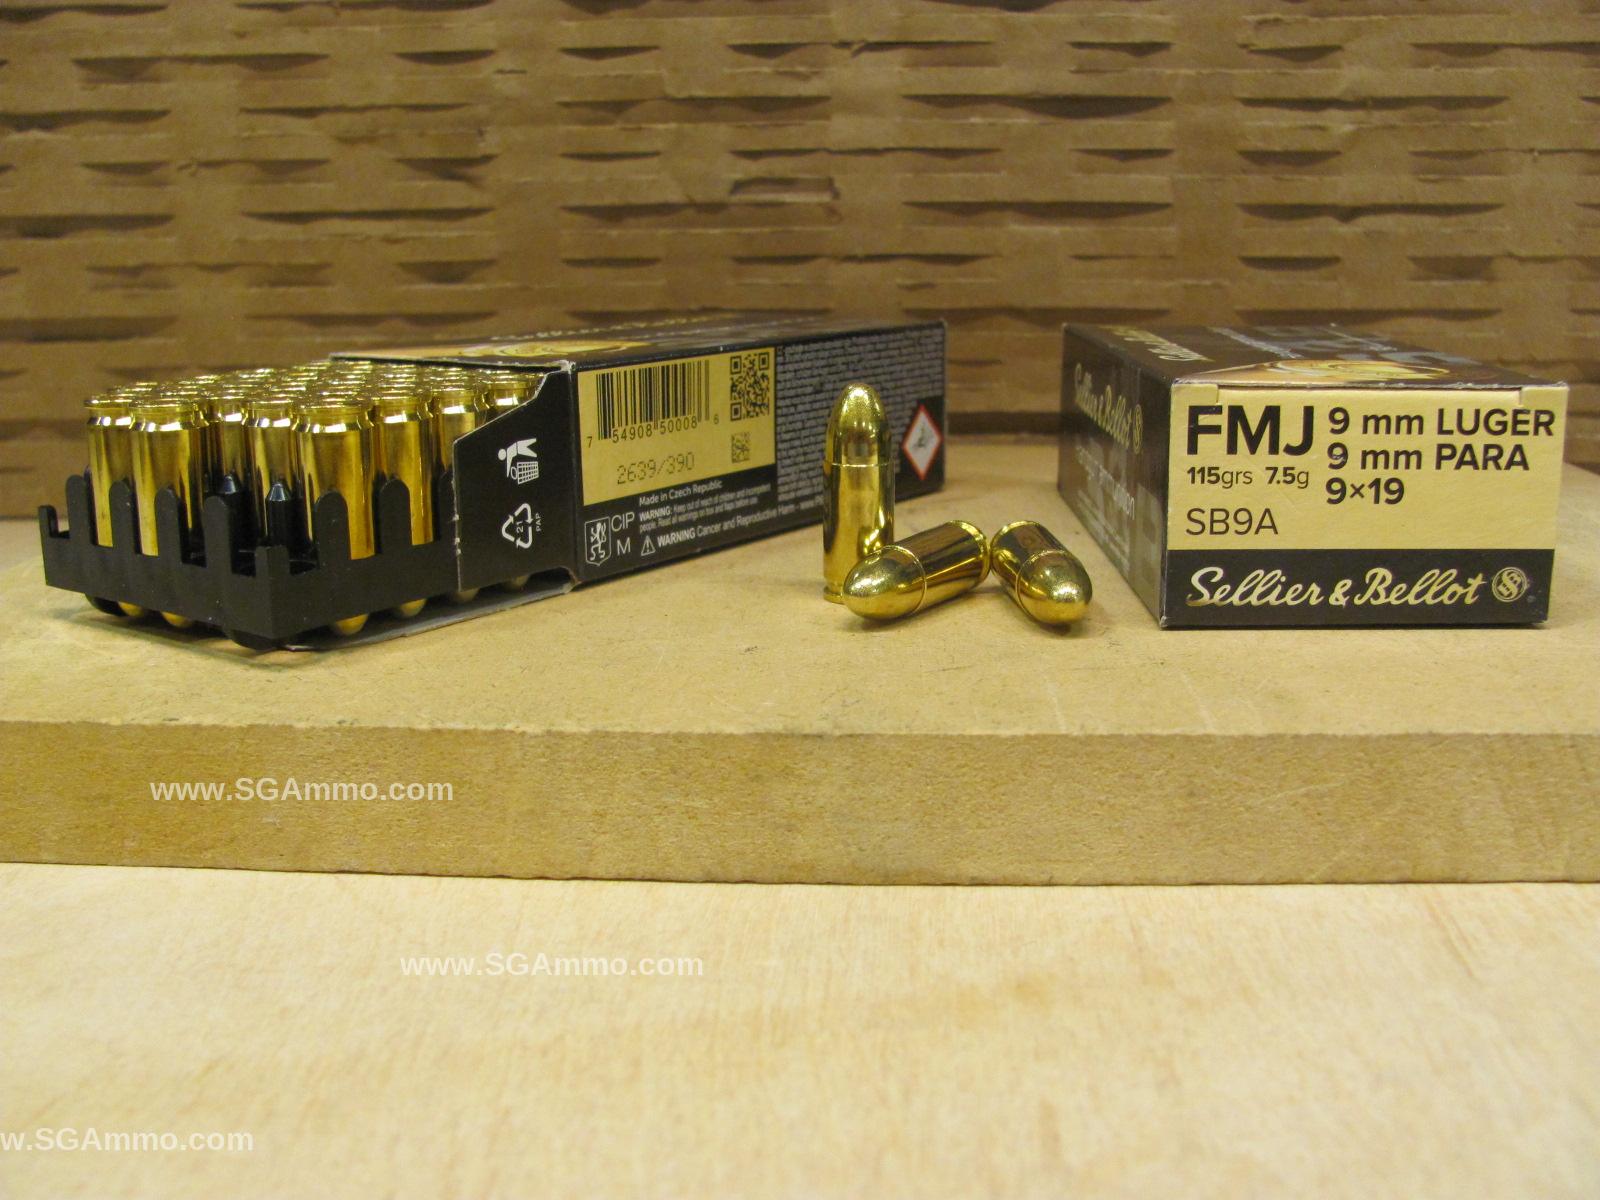 500 Round Can - 9mm Luger Sellier Bellot 115 Grain FMJ Brass Case Ammo - SB9A - Packed in M19A1 Canister